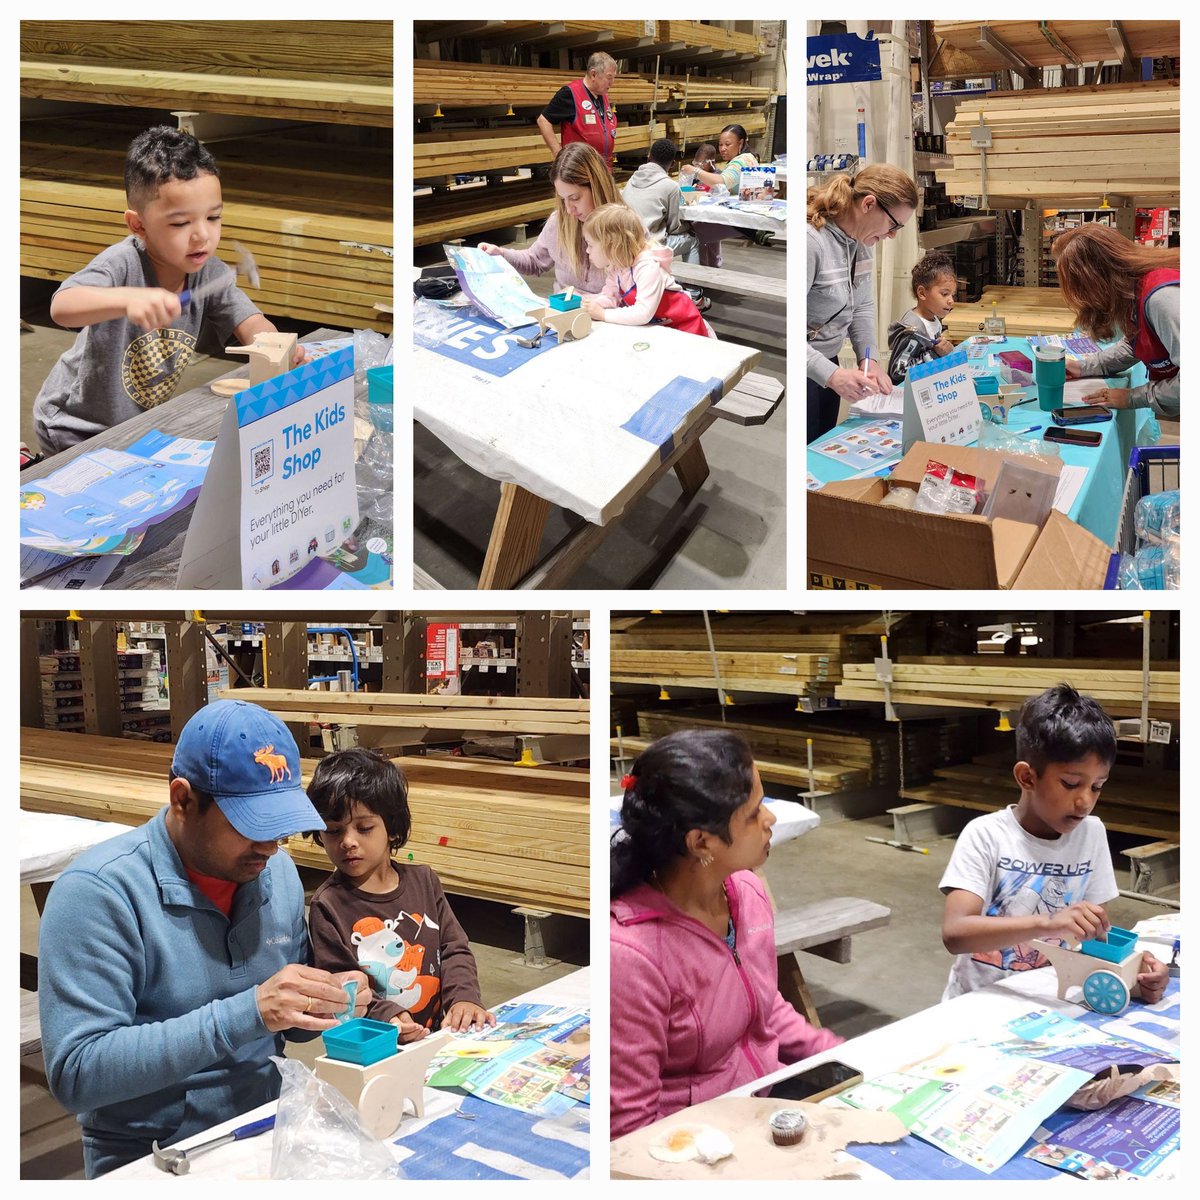 Store 2357,Fantastic kid's clinic! All 100 kits are gone! Incredible turnout and support from our community.Thank you,Brandi, Ed,and Ron, for always delivering an AMAZING experience to our kids and families. Our store is fortunate to have such wonderful associates!@BlueBoxR1